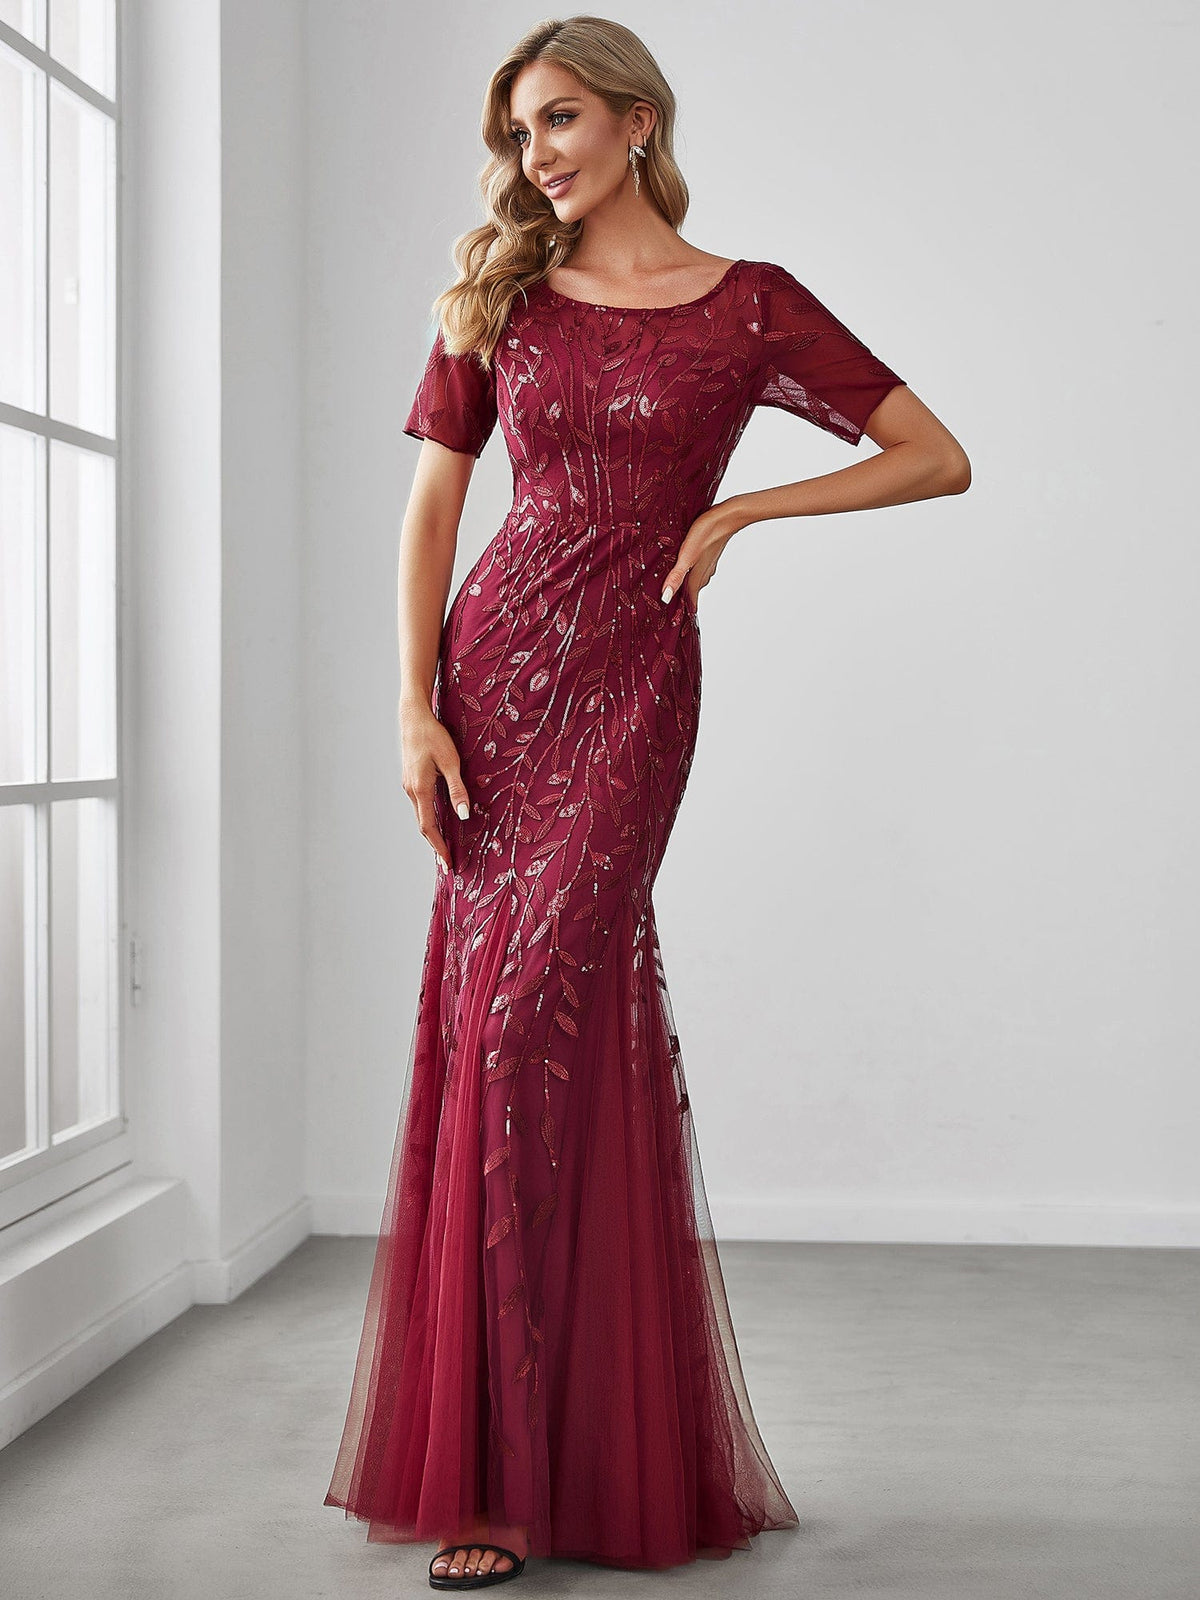 Floral Sequin Print Maxi Long Fishtail Tulle Dresses With Half Sleeve #Color_Burgundy